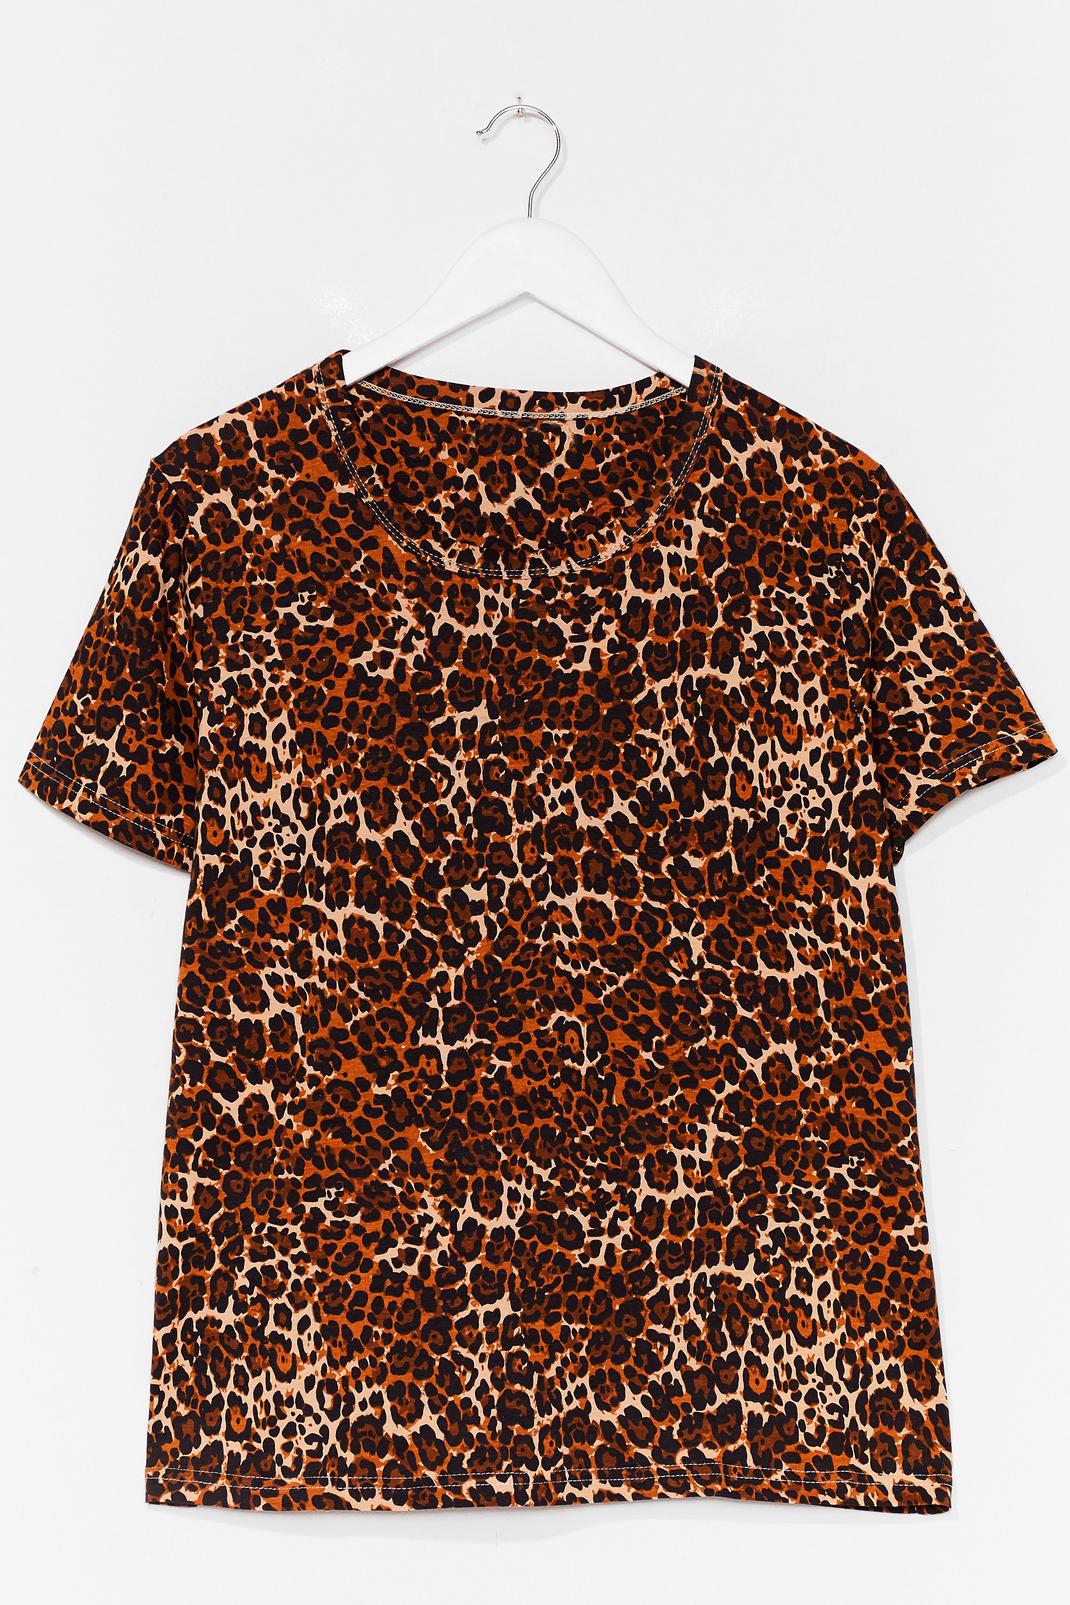 Meow Deep is Your Love Leopard Plus Tee image number 1